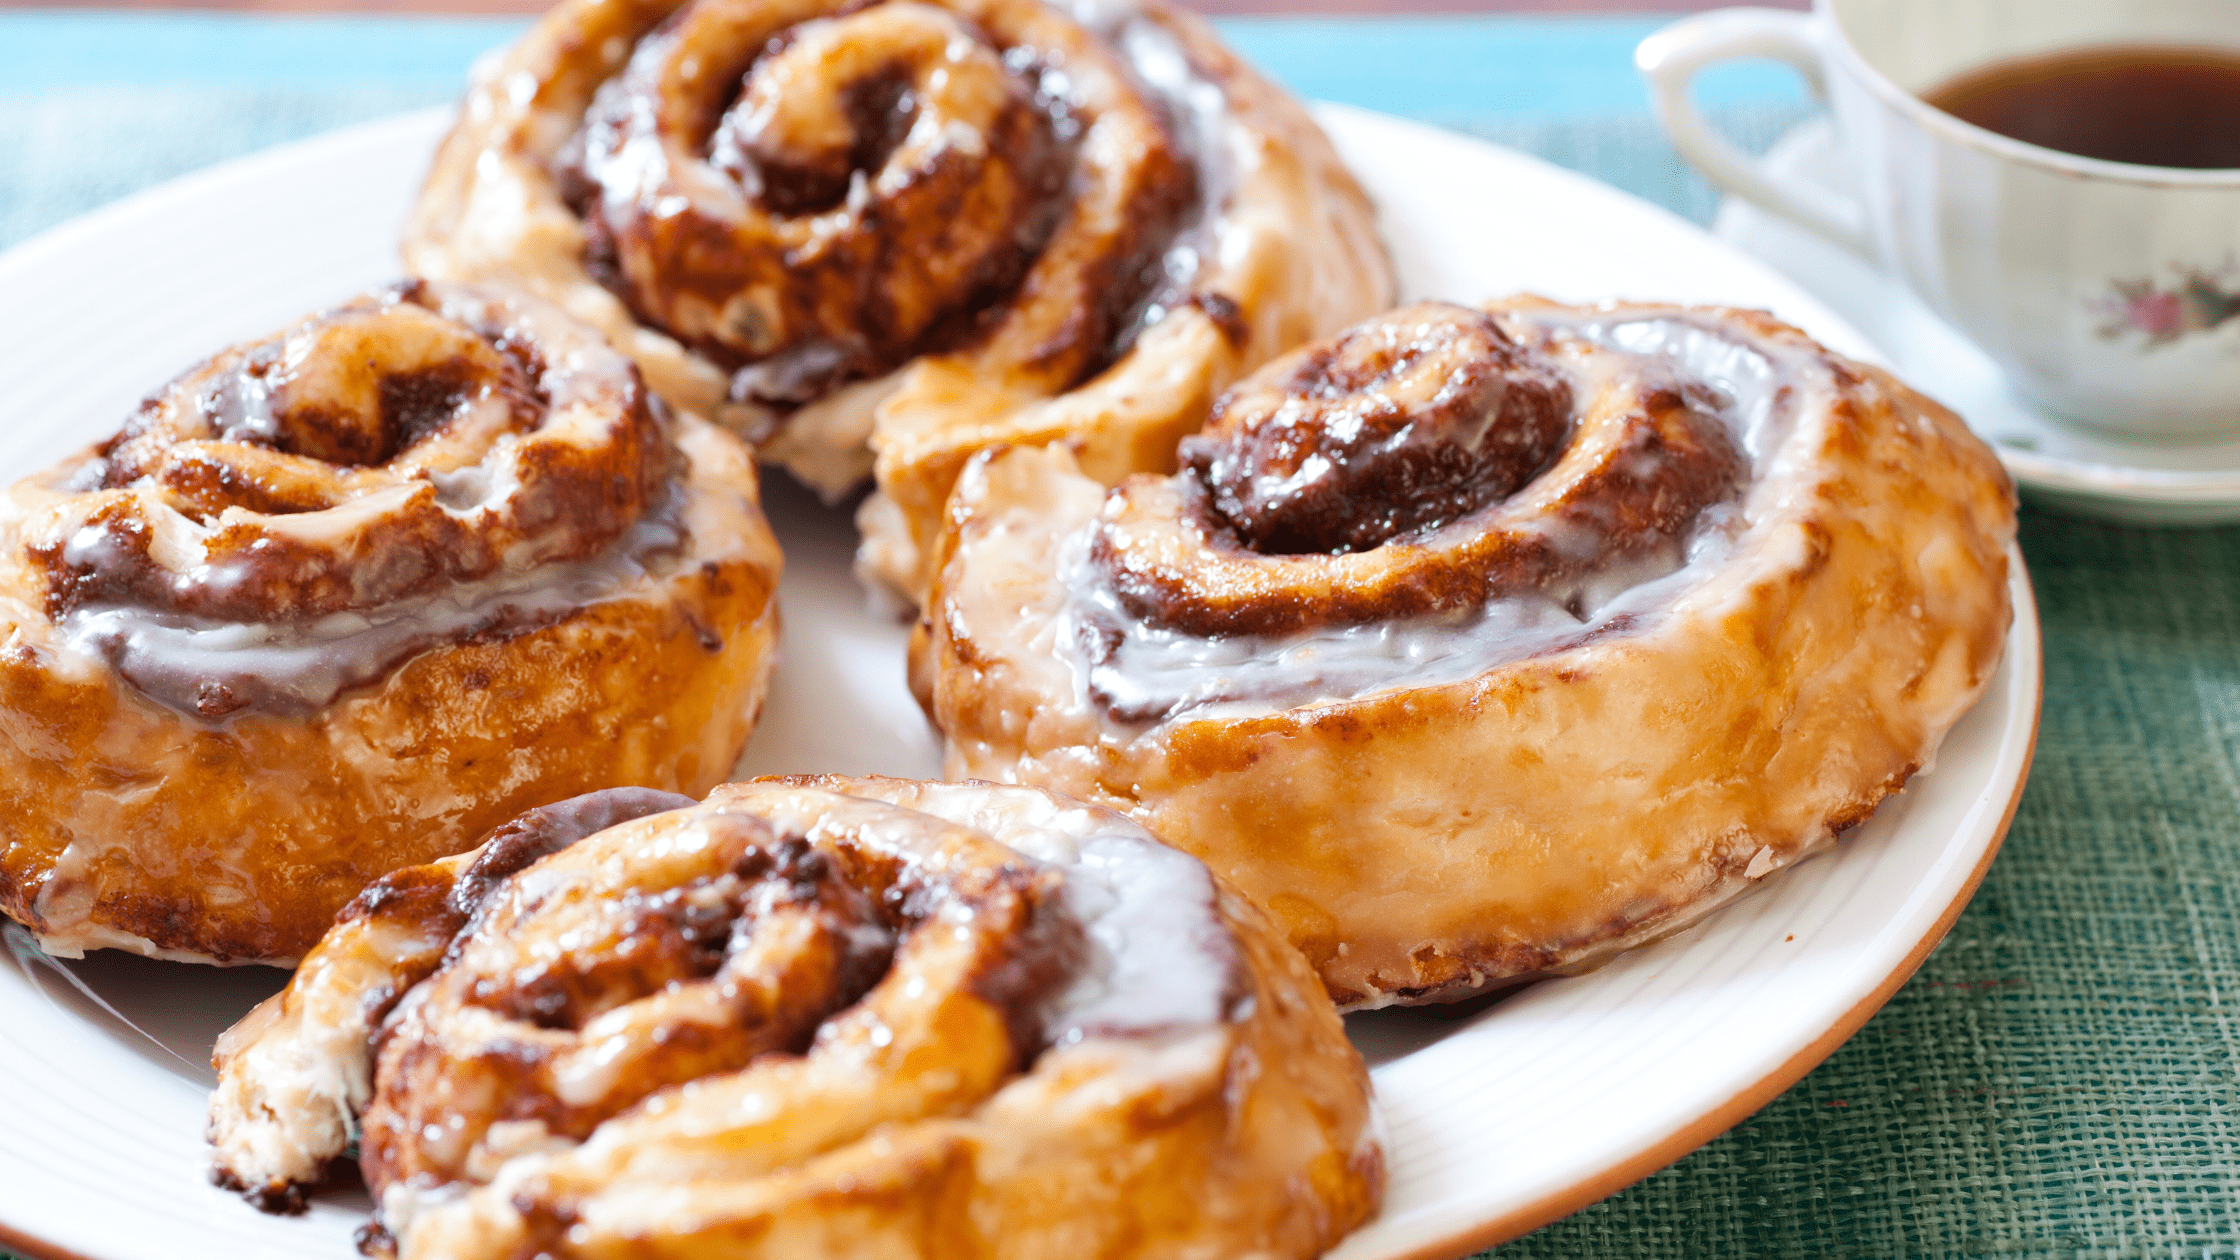 a plate of cinnamon rolls and a china teacup